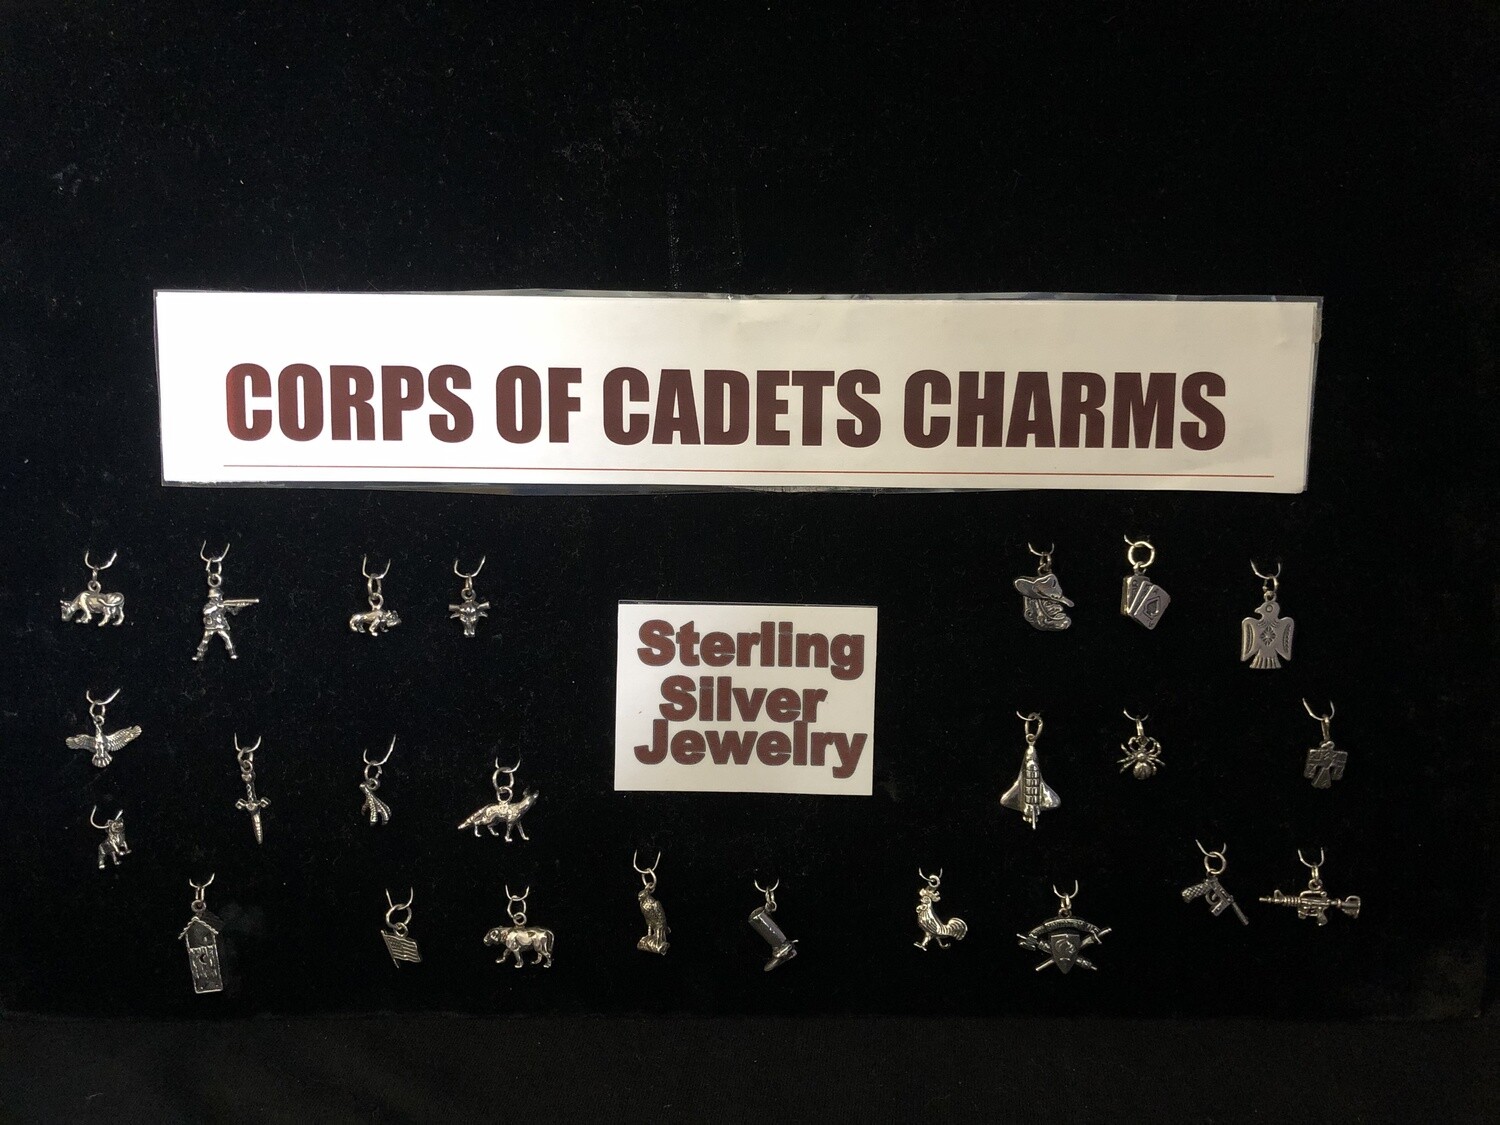 Corps of Cadets Charms